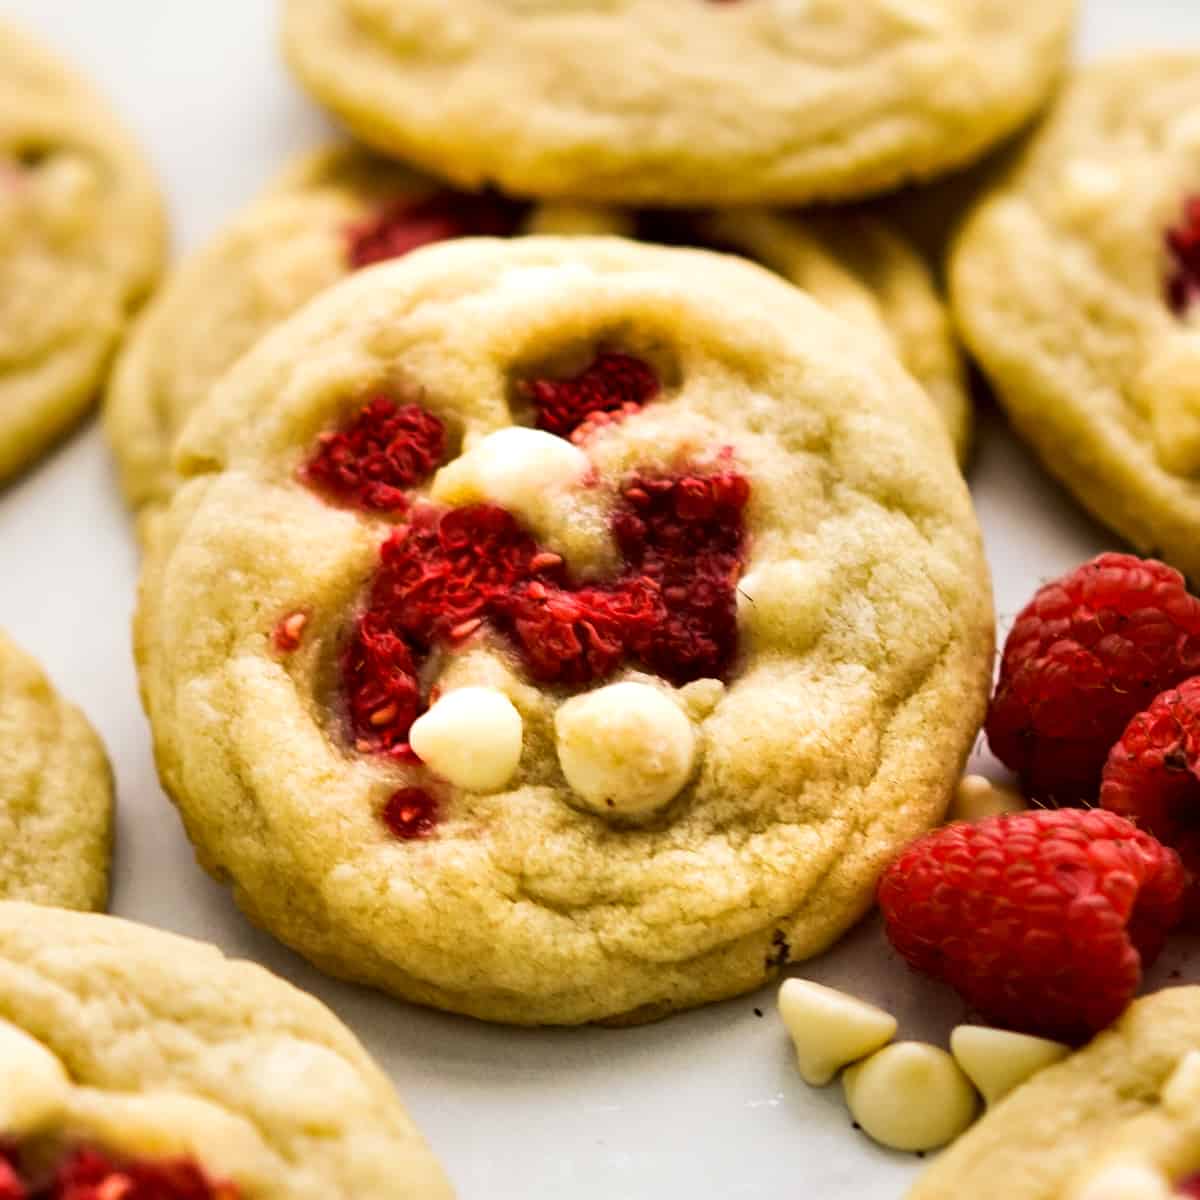 A round cookie filled with white chocolate chips and raspberries